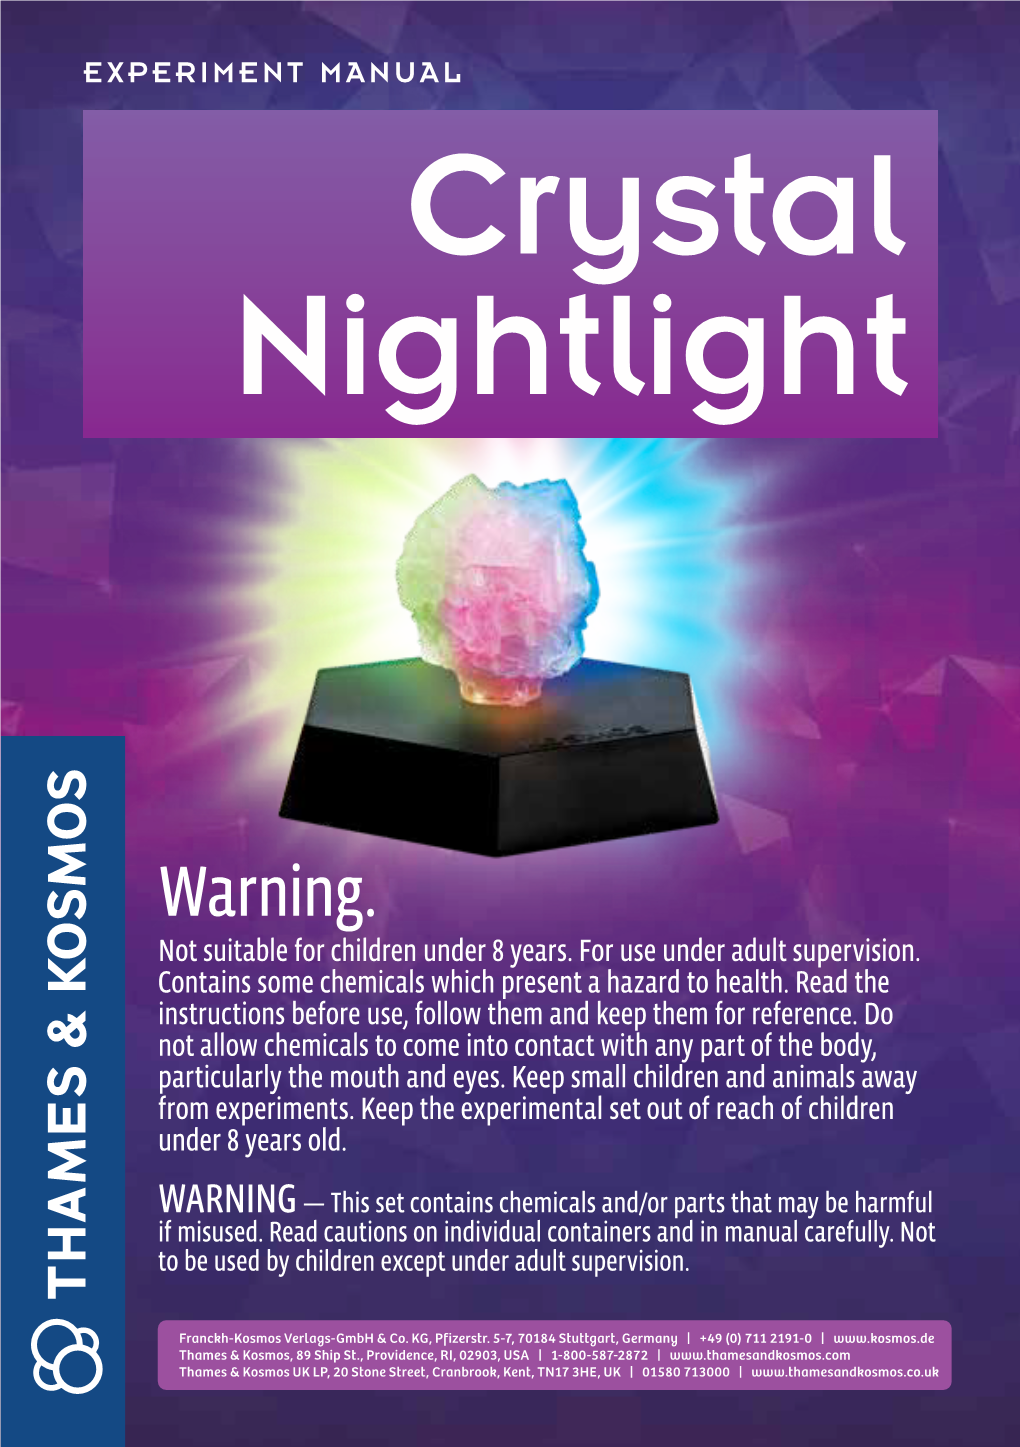 Crystal Nightlight! Experiment Should Be Kept Clear of Any